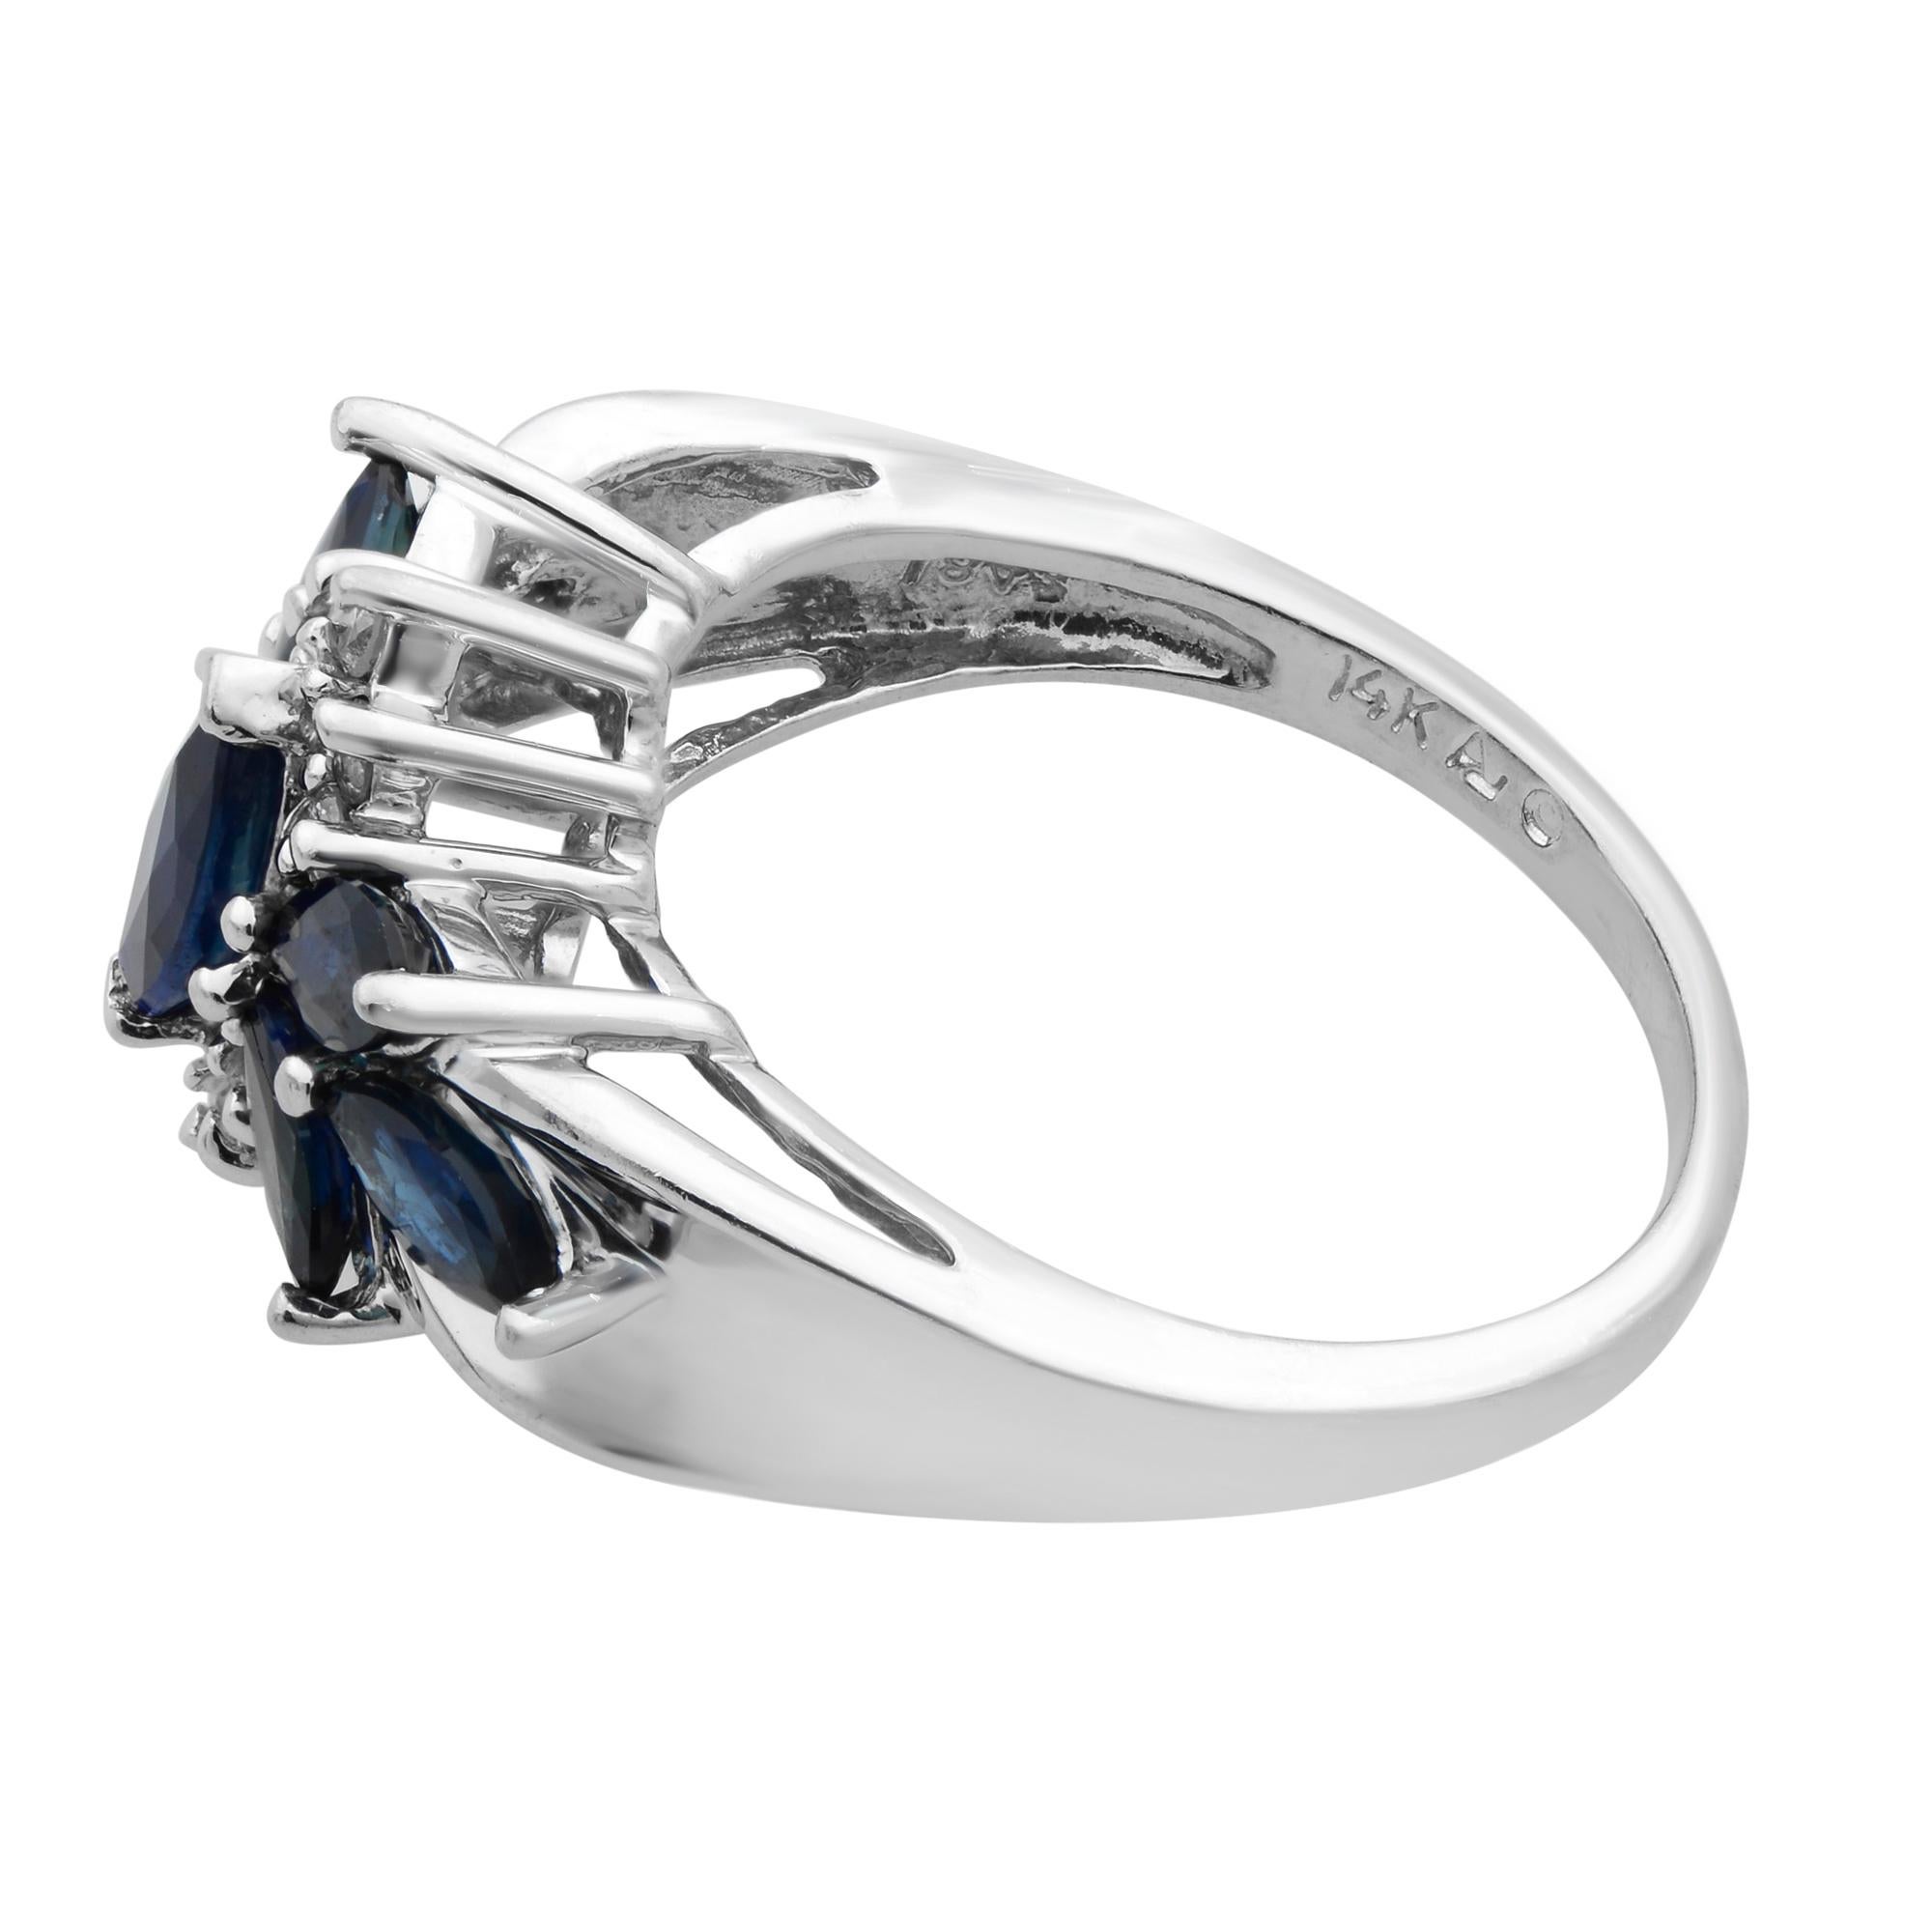 Rachel Koen Sapphire 1.0cttw Diamond 0.1cttw Cocktail Ring 14K White Gold In Excellent Condition For Sale In New York, NY